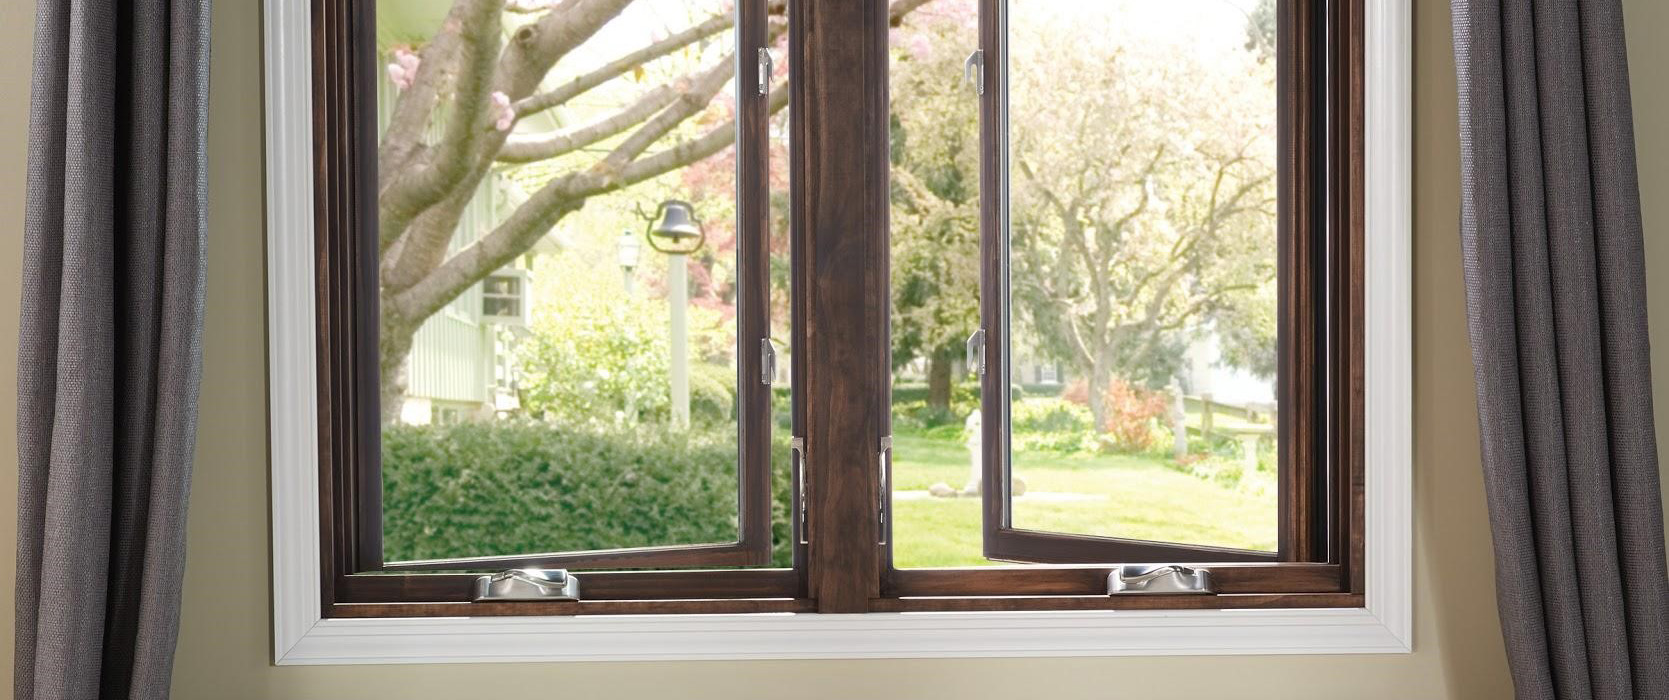 7 Signs It’s Time to Replace Your Windows